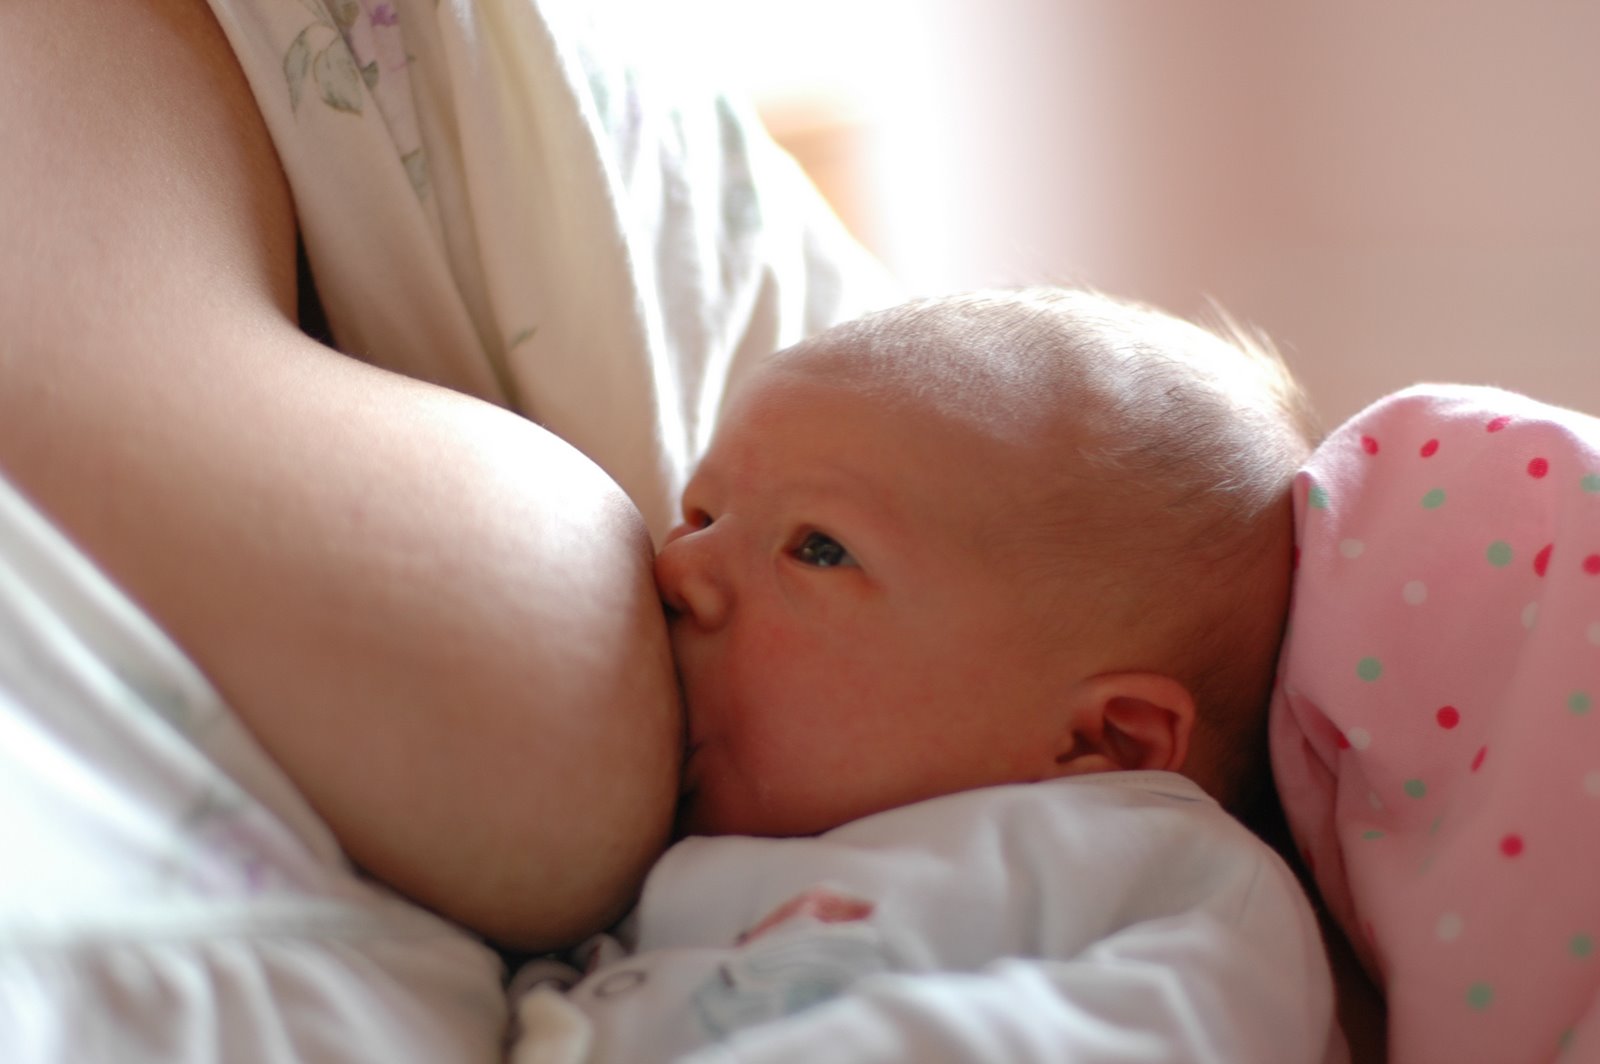 Image: Nursing baby is good for mom too: Breastfeeding found to reduce risk of heart attack, stroke later in life